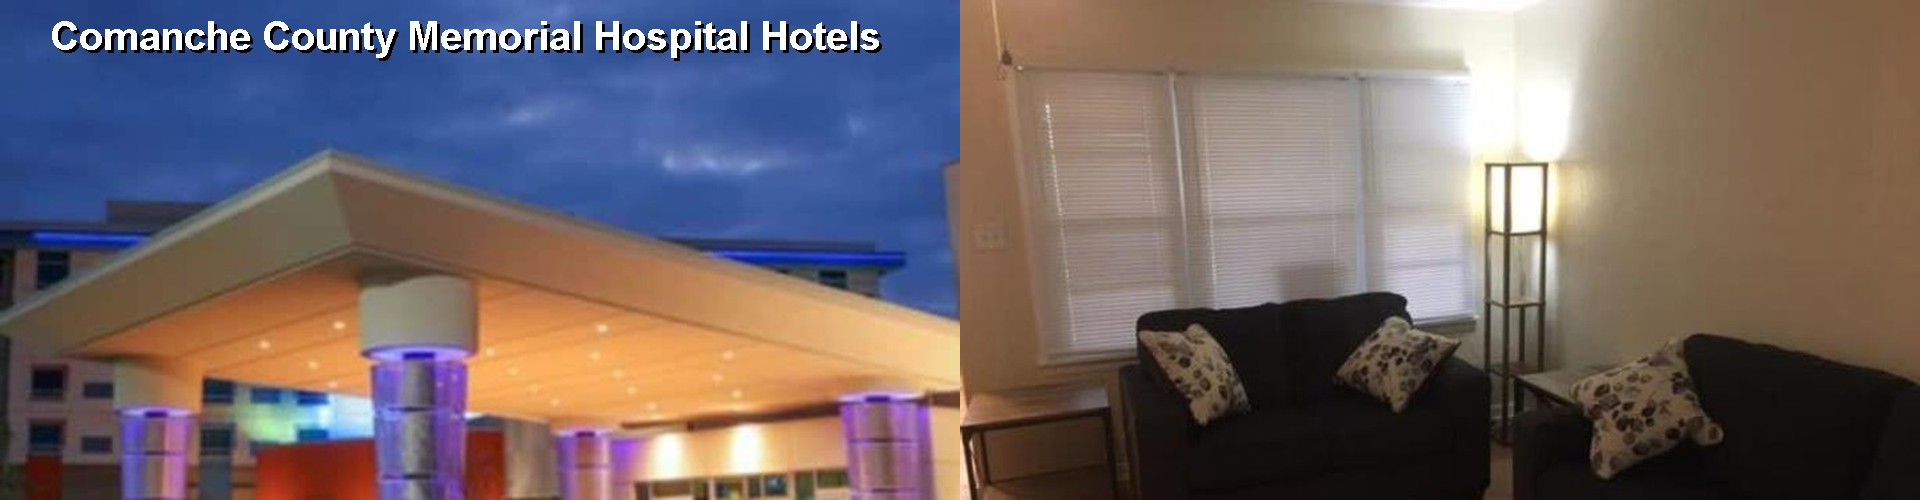 4 Best Hotels near Comanche County Memorial Hospital